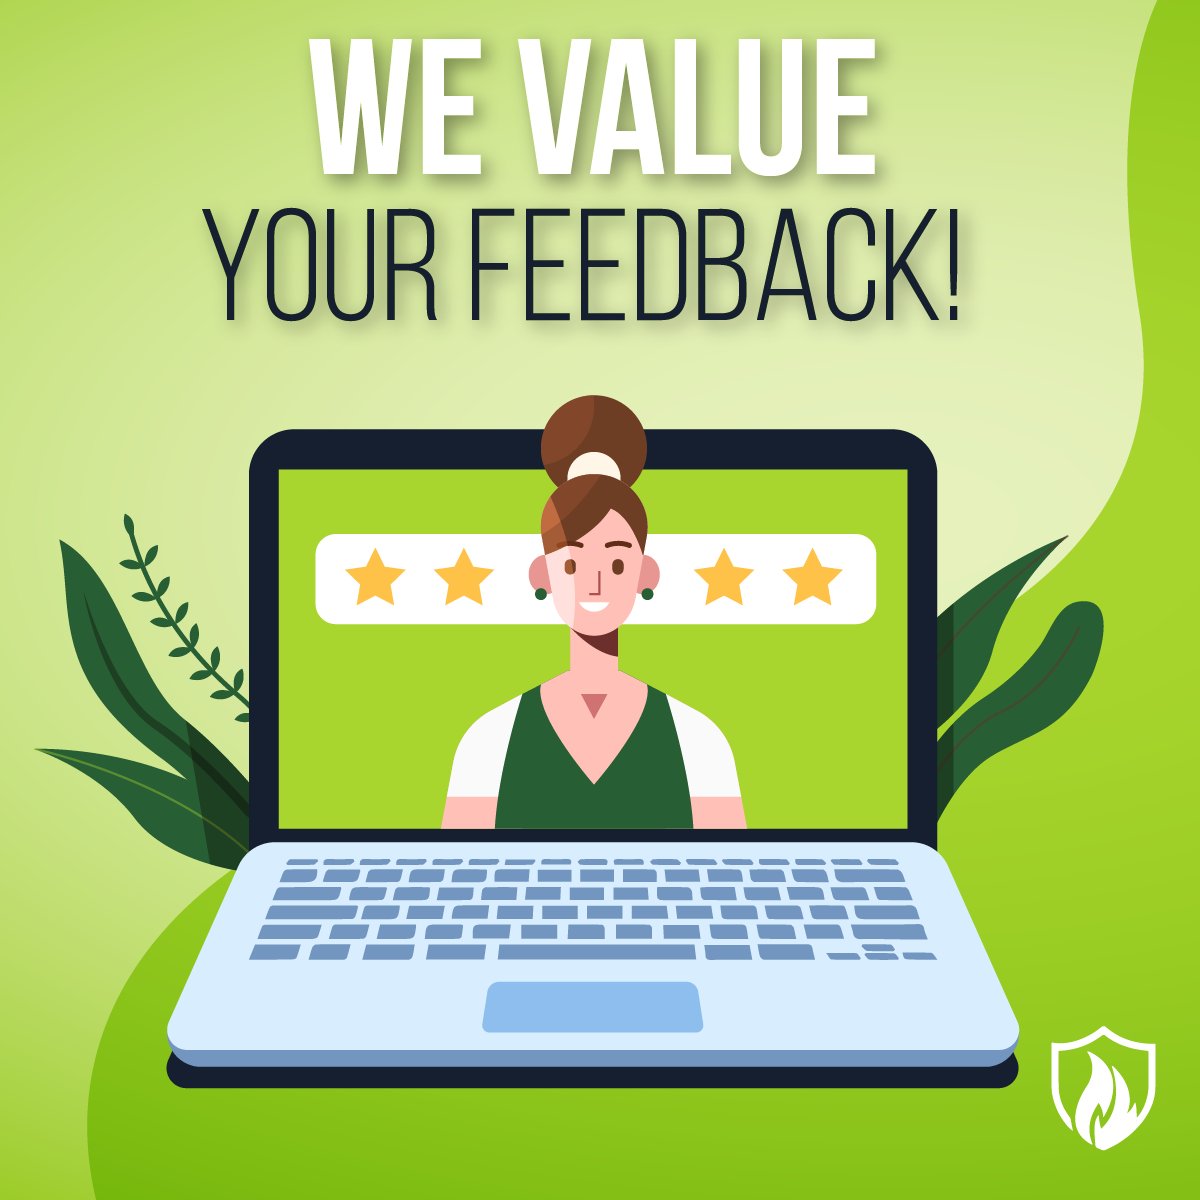 We want to hear from you! 🌟 Share your experience with Integrity in the link below. Your feedback helps us serve you better! 😊 #CustomerFeedback #IntegrityInsurance #WeCare

g.page/r/CYaE1BvxQOZX…